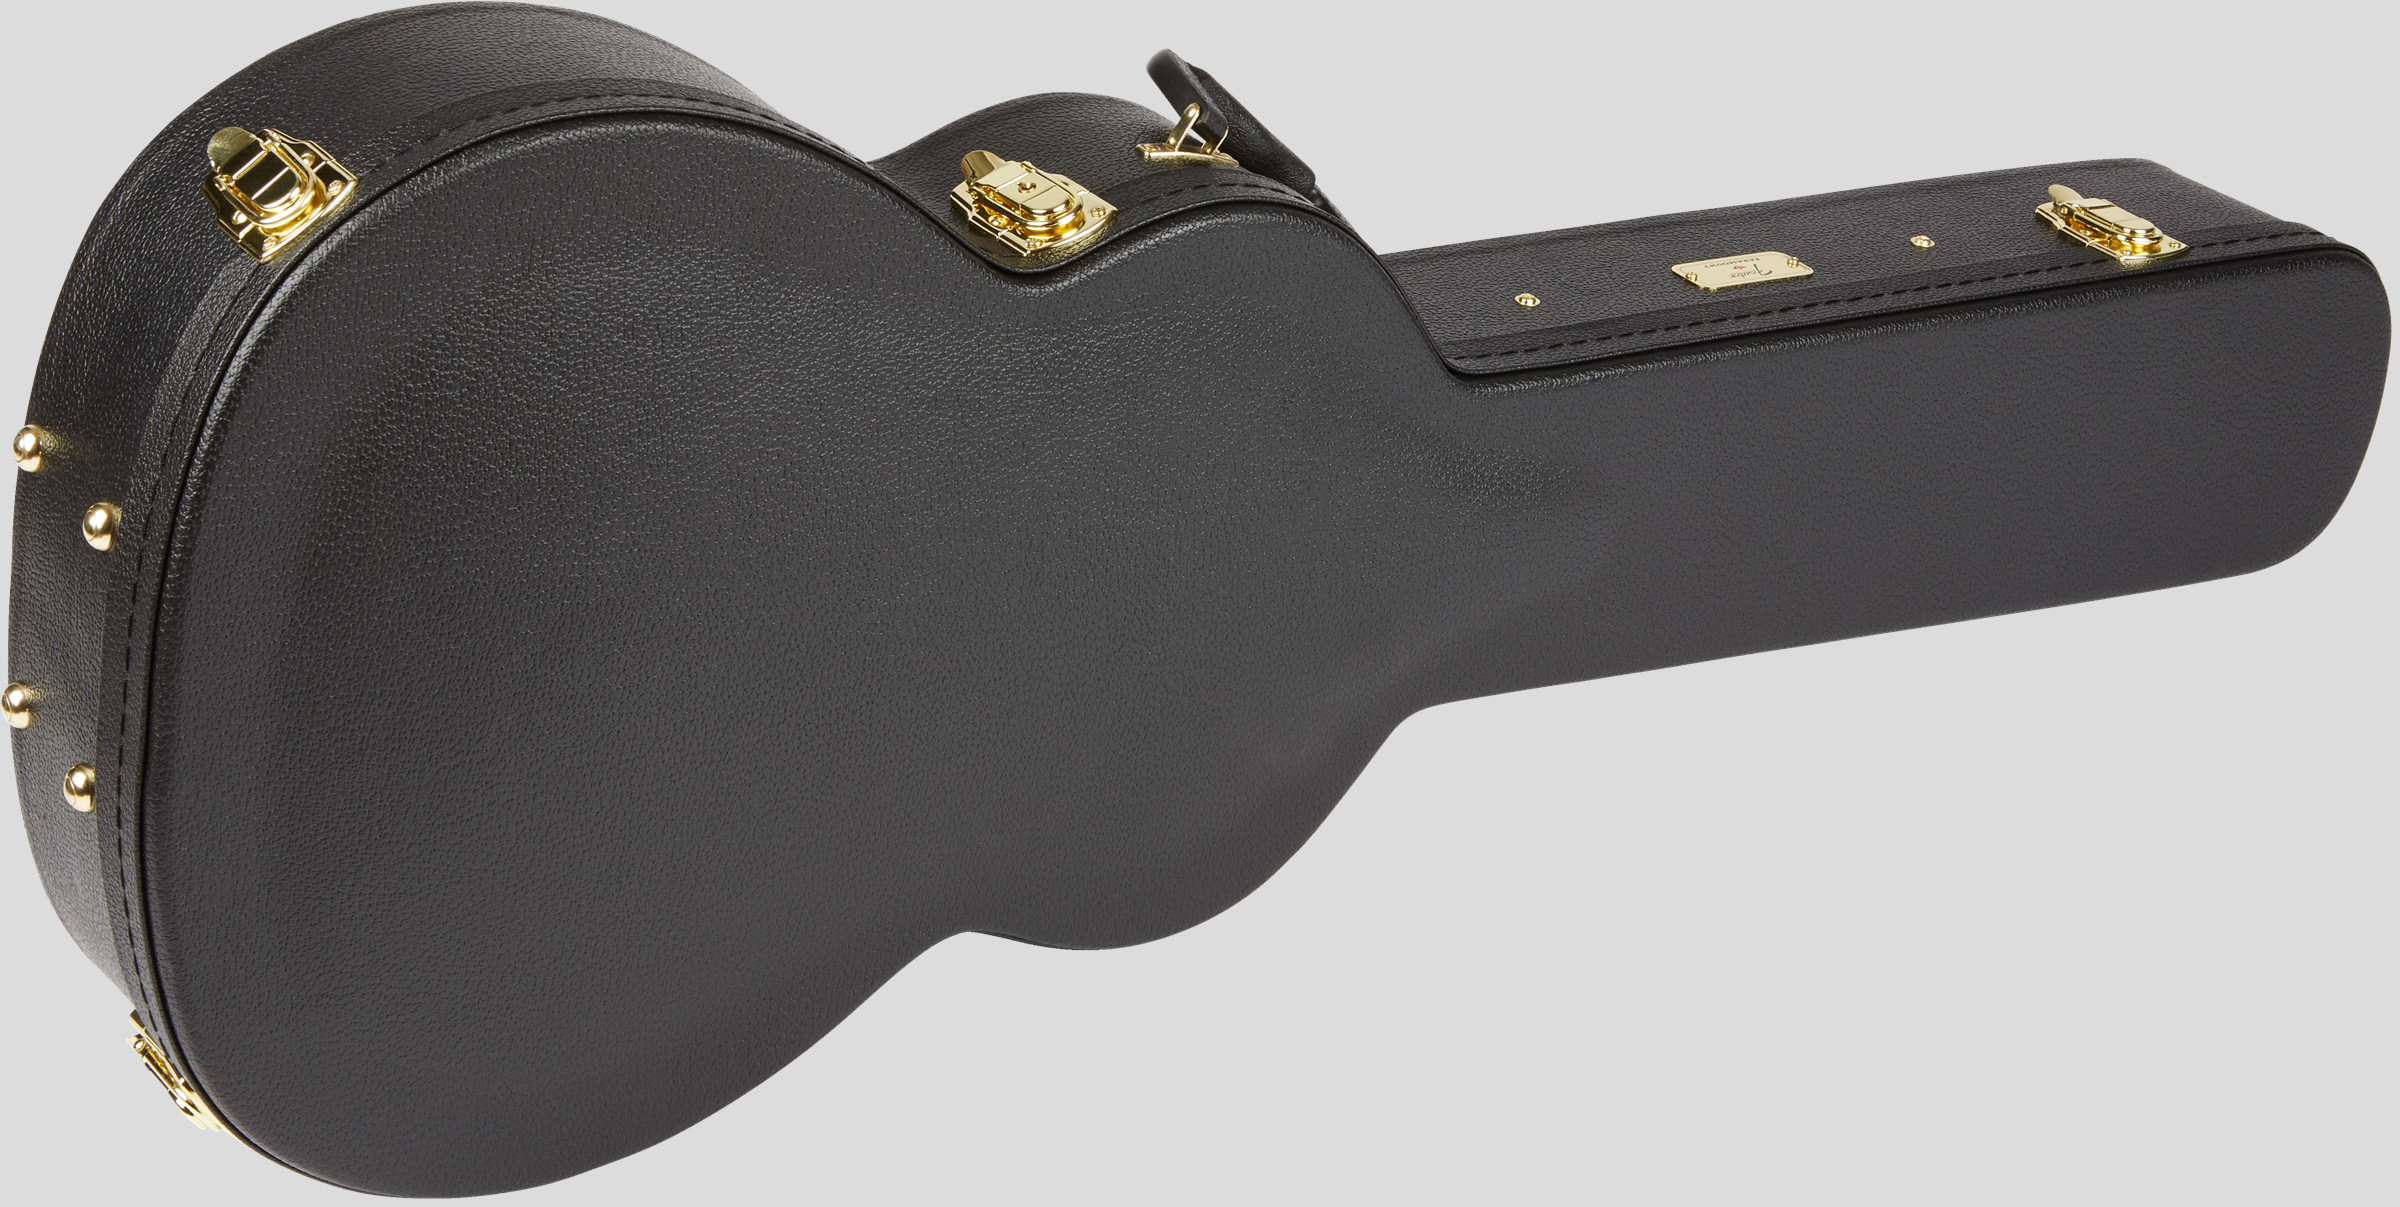 Fender Limited Edition PM-1 Deluxe Black with Ebony Fingerboard 5